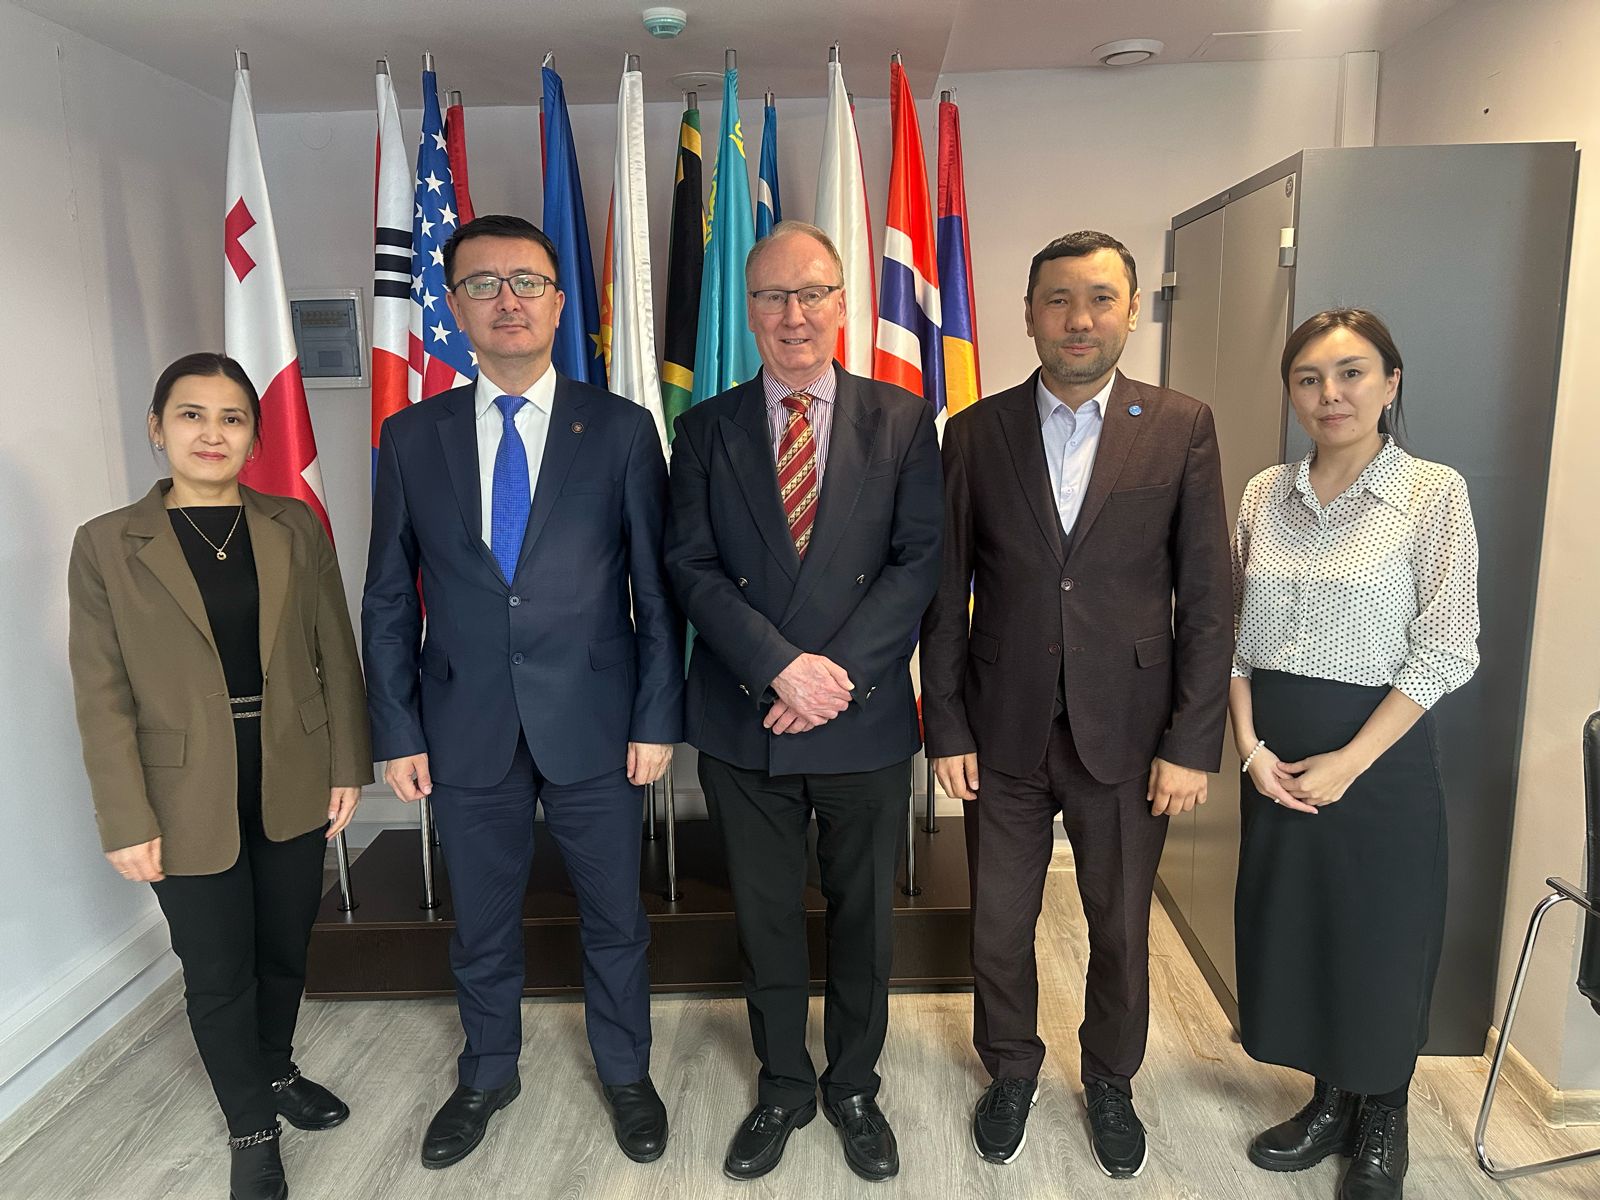 ISTC met with the Vice Minister of Science and Higher Education of the Republic of Kazakhstan